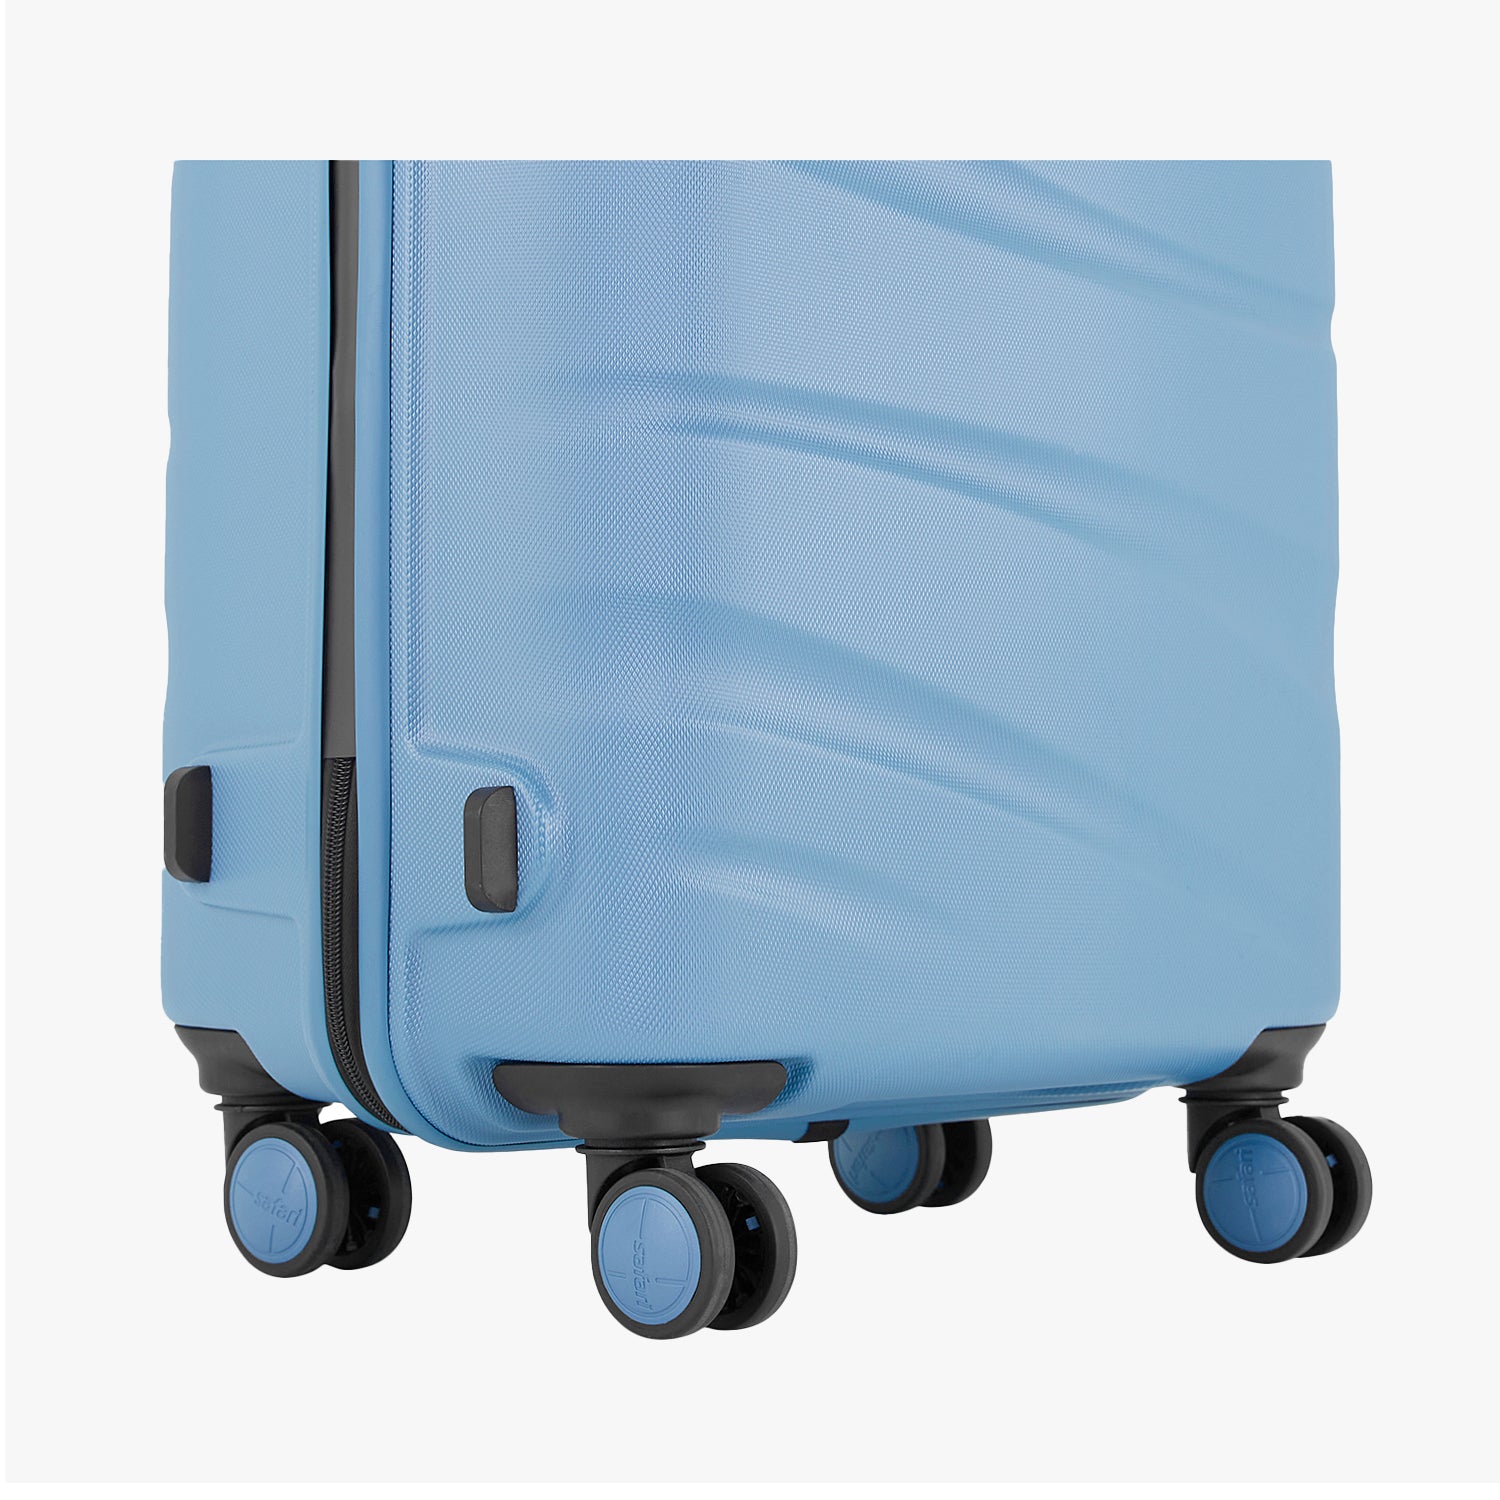 Persia Hard Luggage with Dual Wheels Combo (Small, Medium and Large)- Pearl Blue